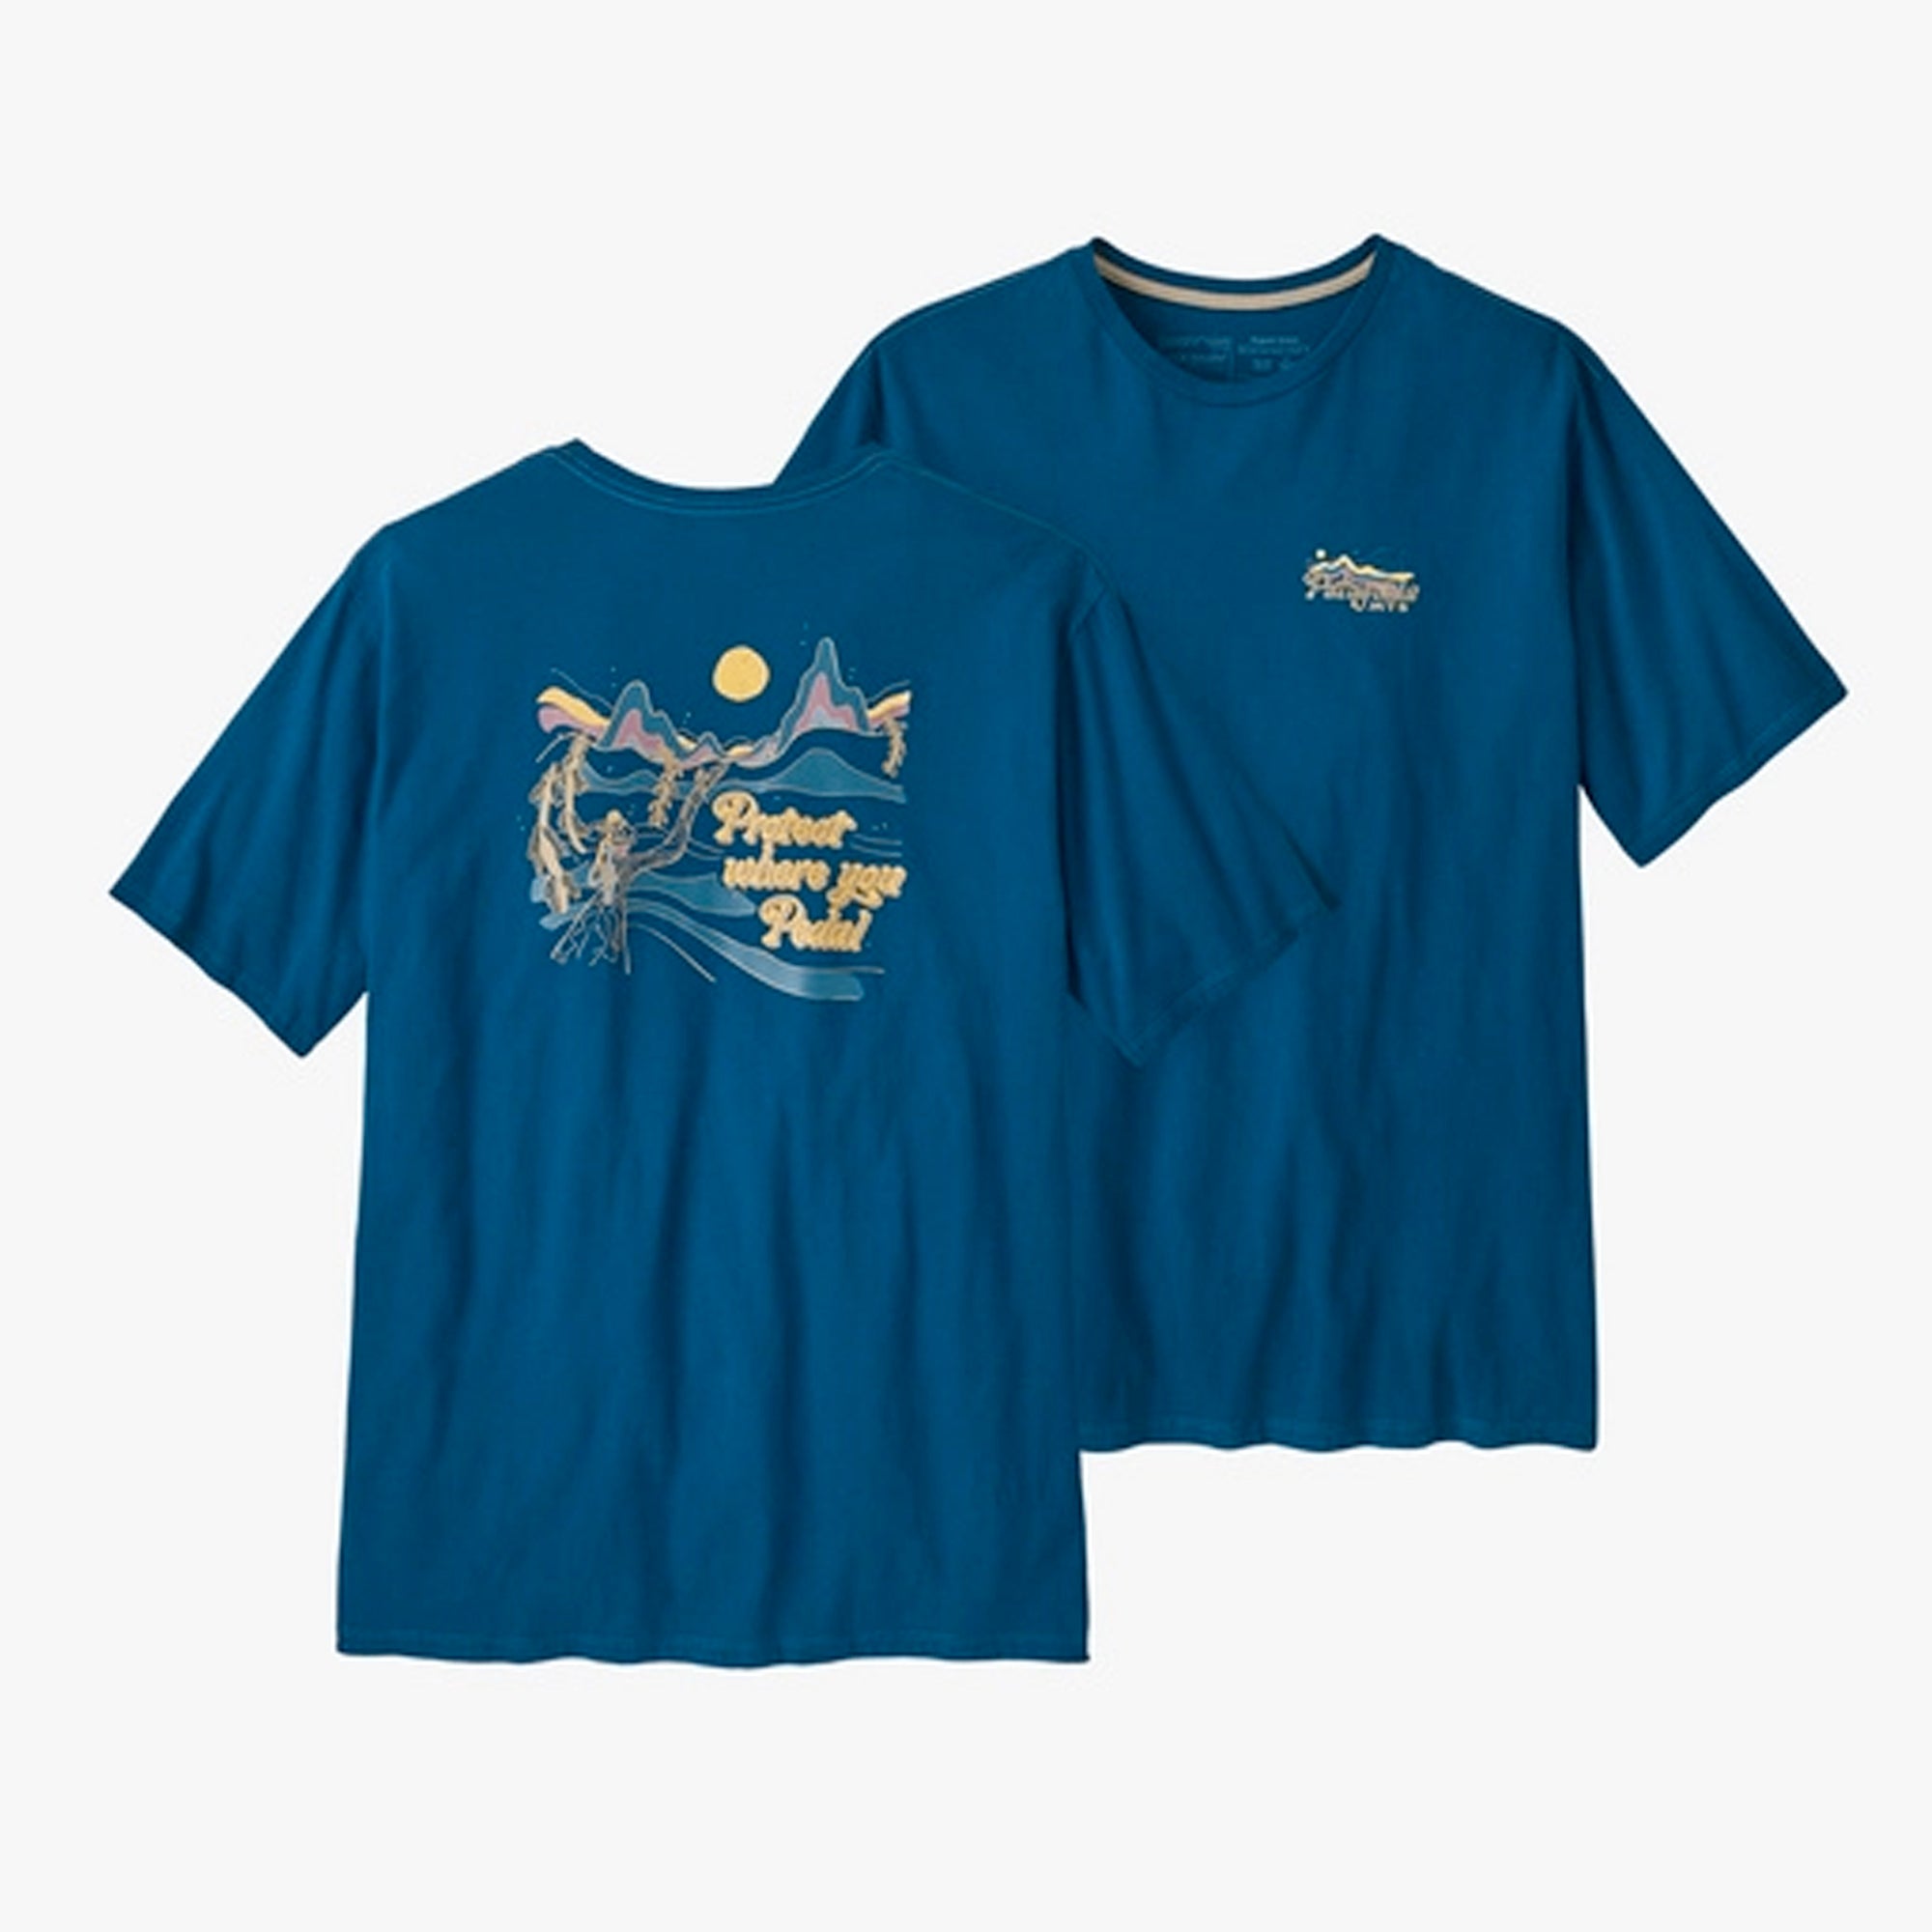 Patagonia Protect Pedal Men's S/S T-Shirt